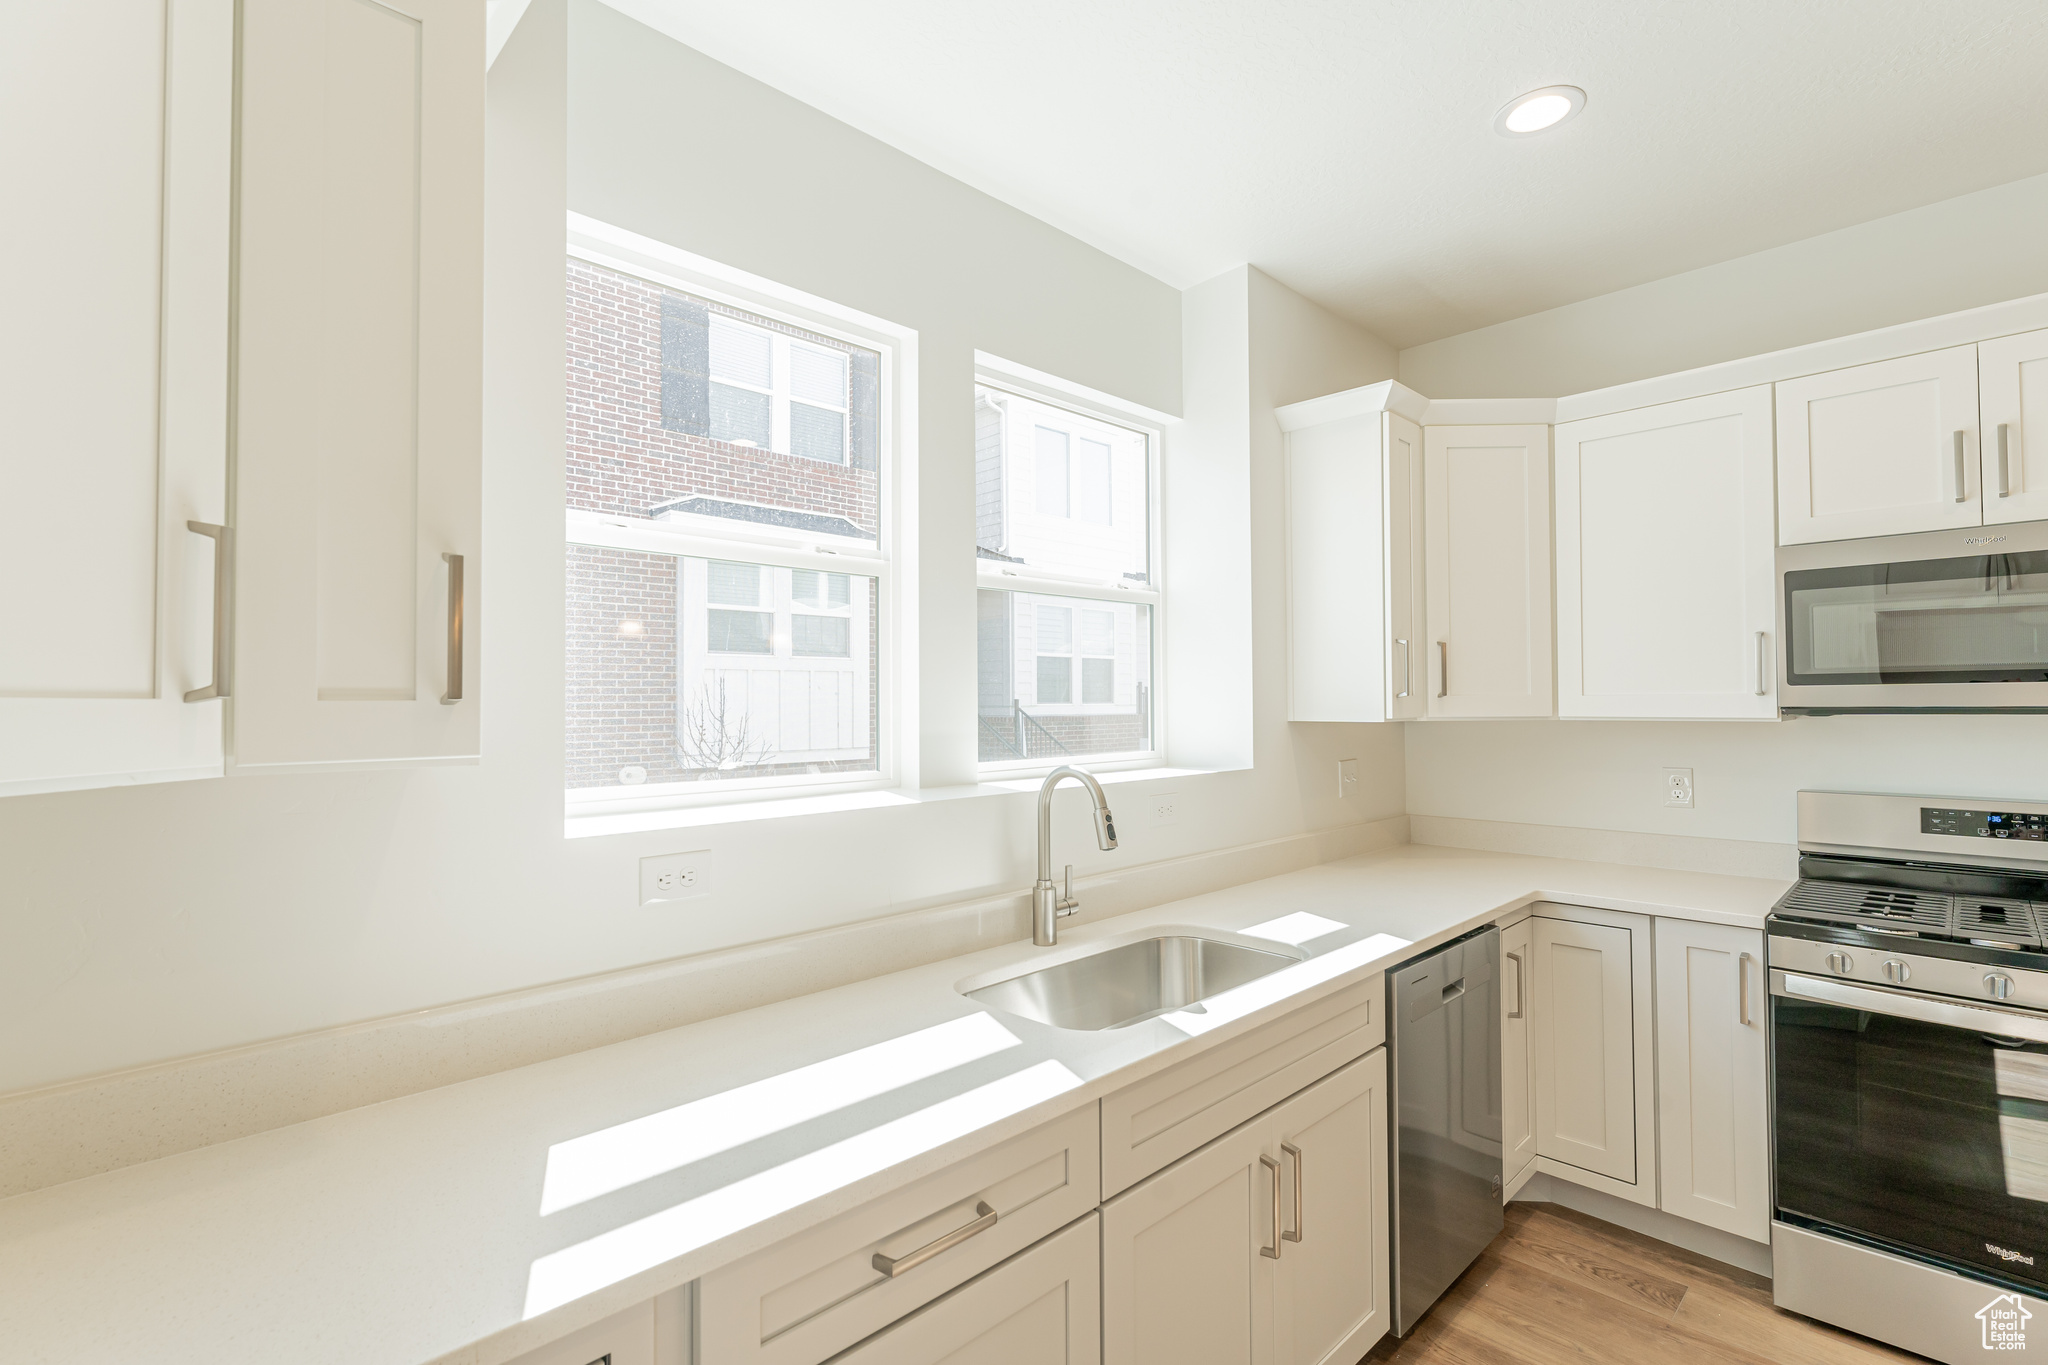 Kitchen featuring a wealth of natural light, light hardwood / wood-style flooring, stainless steel appliances, and sink